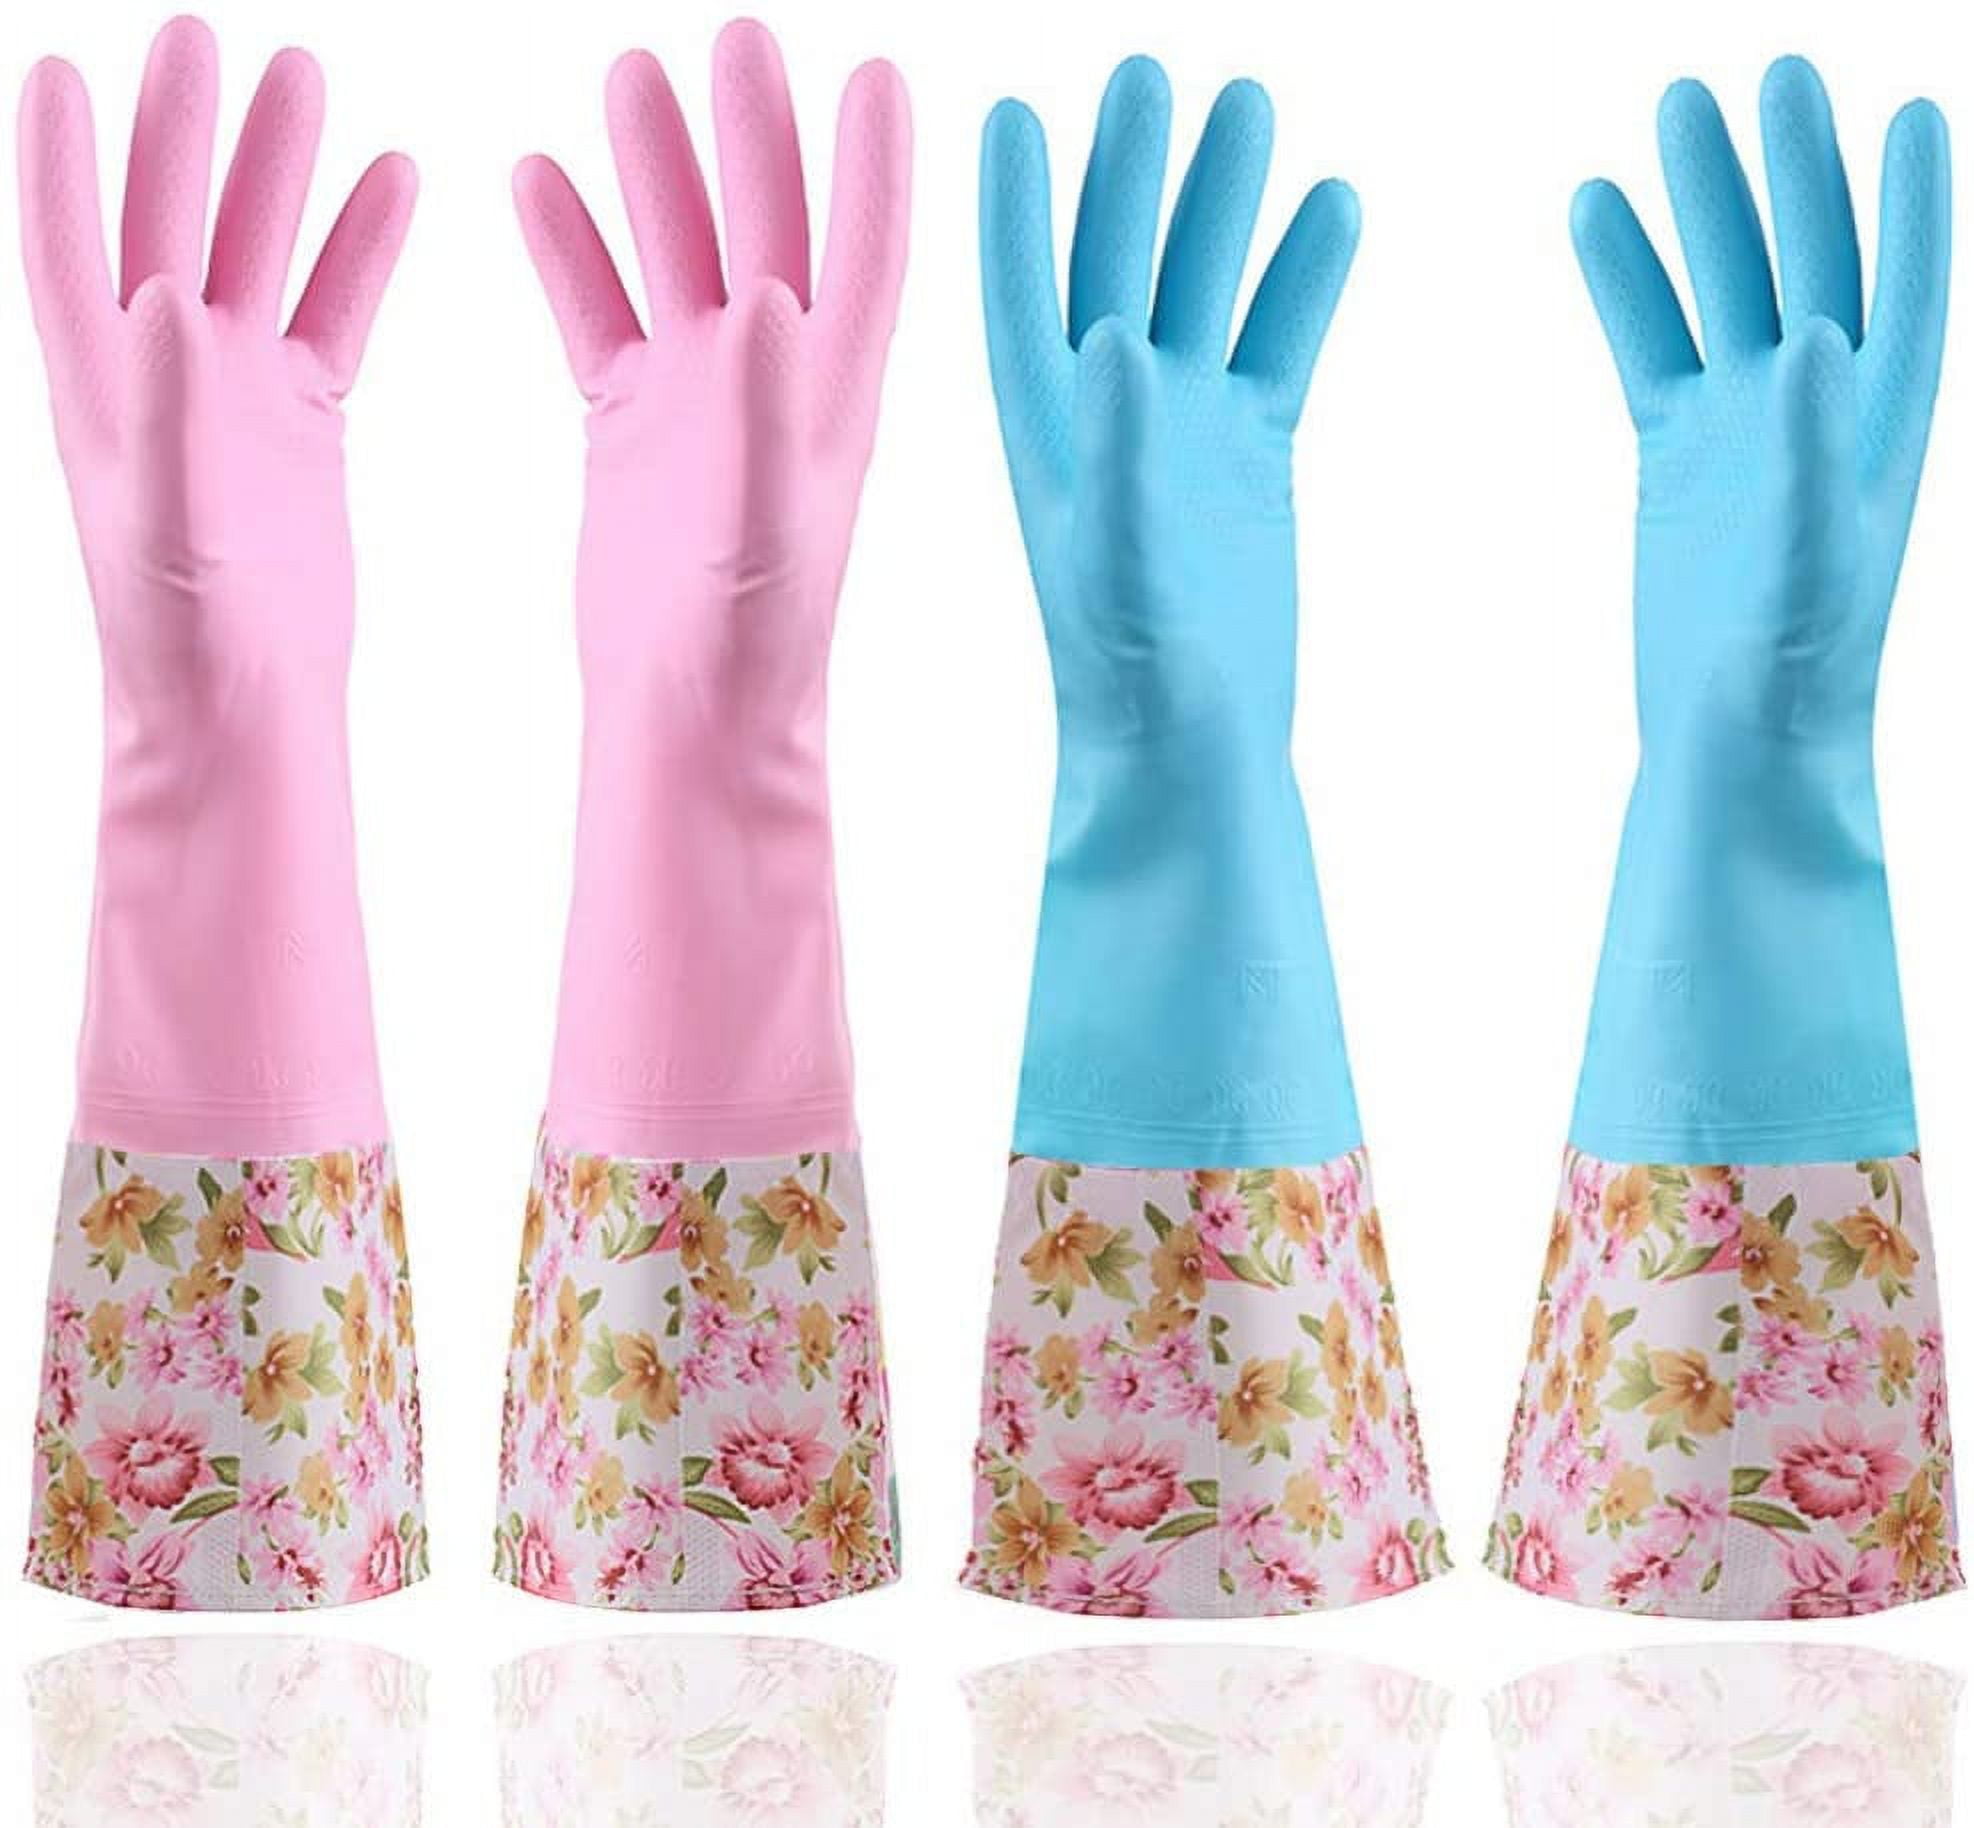 THE MICROFIBER DISH DRYING GLOVES THAT LET YOU REACH EVERY NOOK AND CR –  Genius Products That Are Available Online